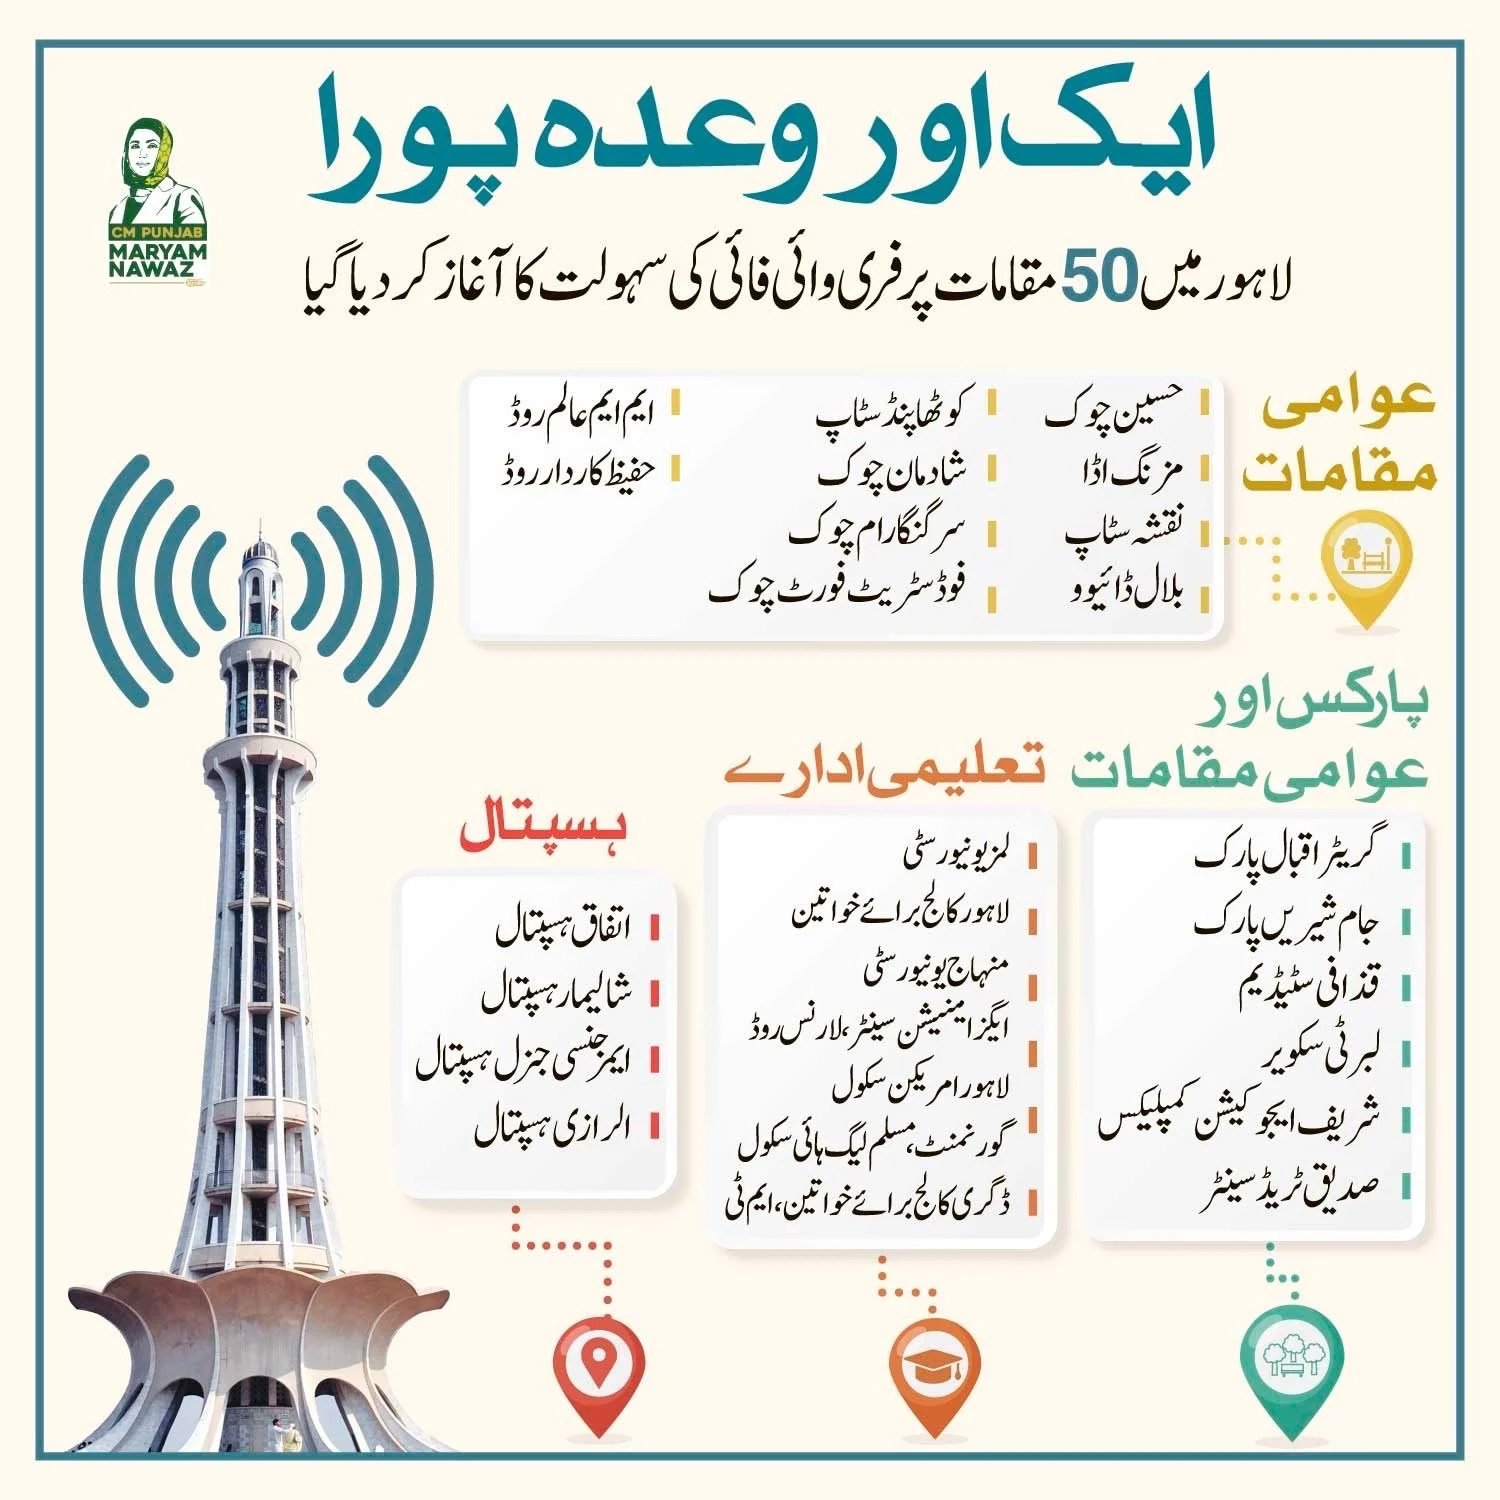 Punjab’s Free WiFi project: Complimentary access for public launched at 50 spots in Lahore